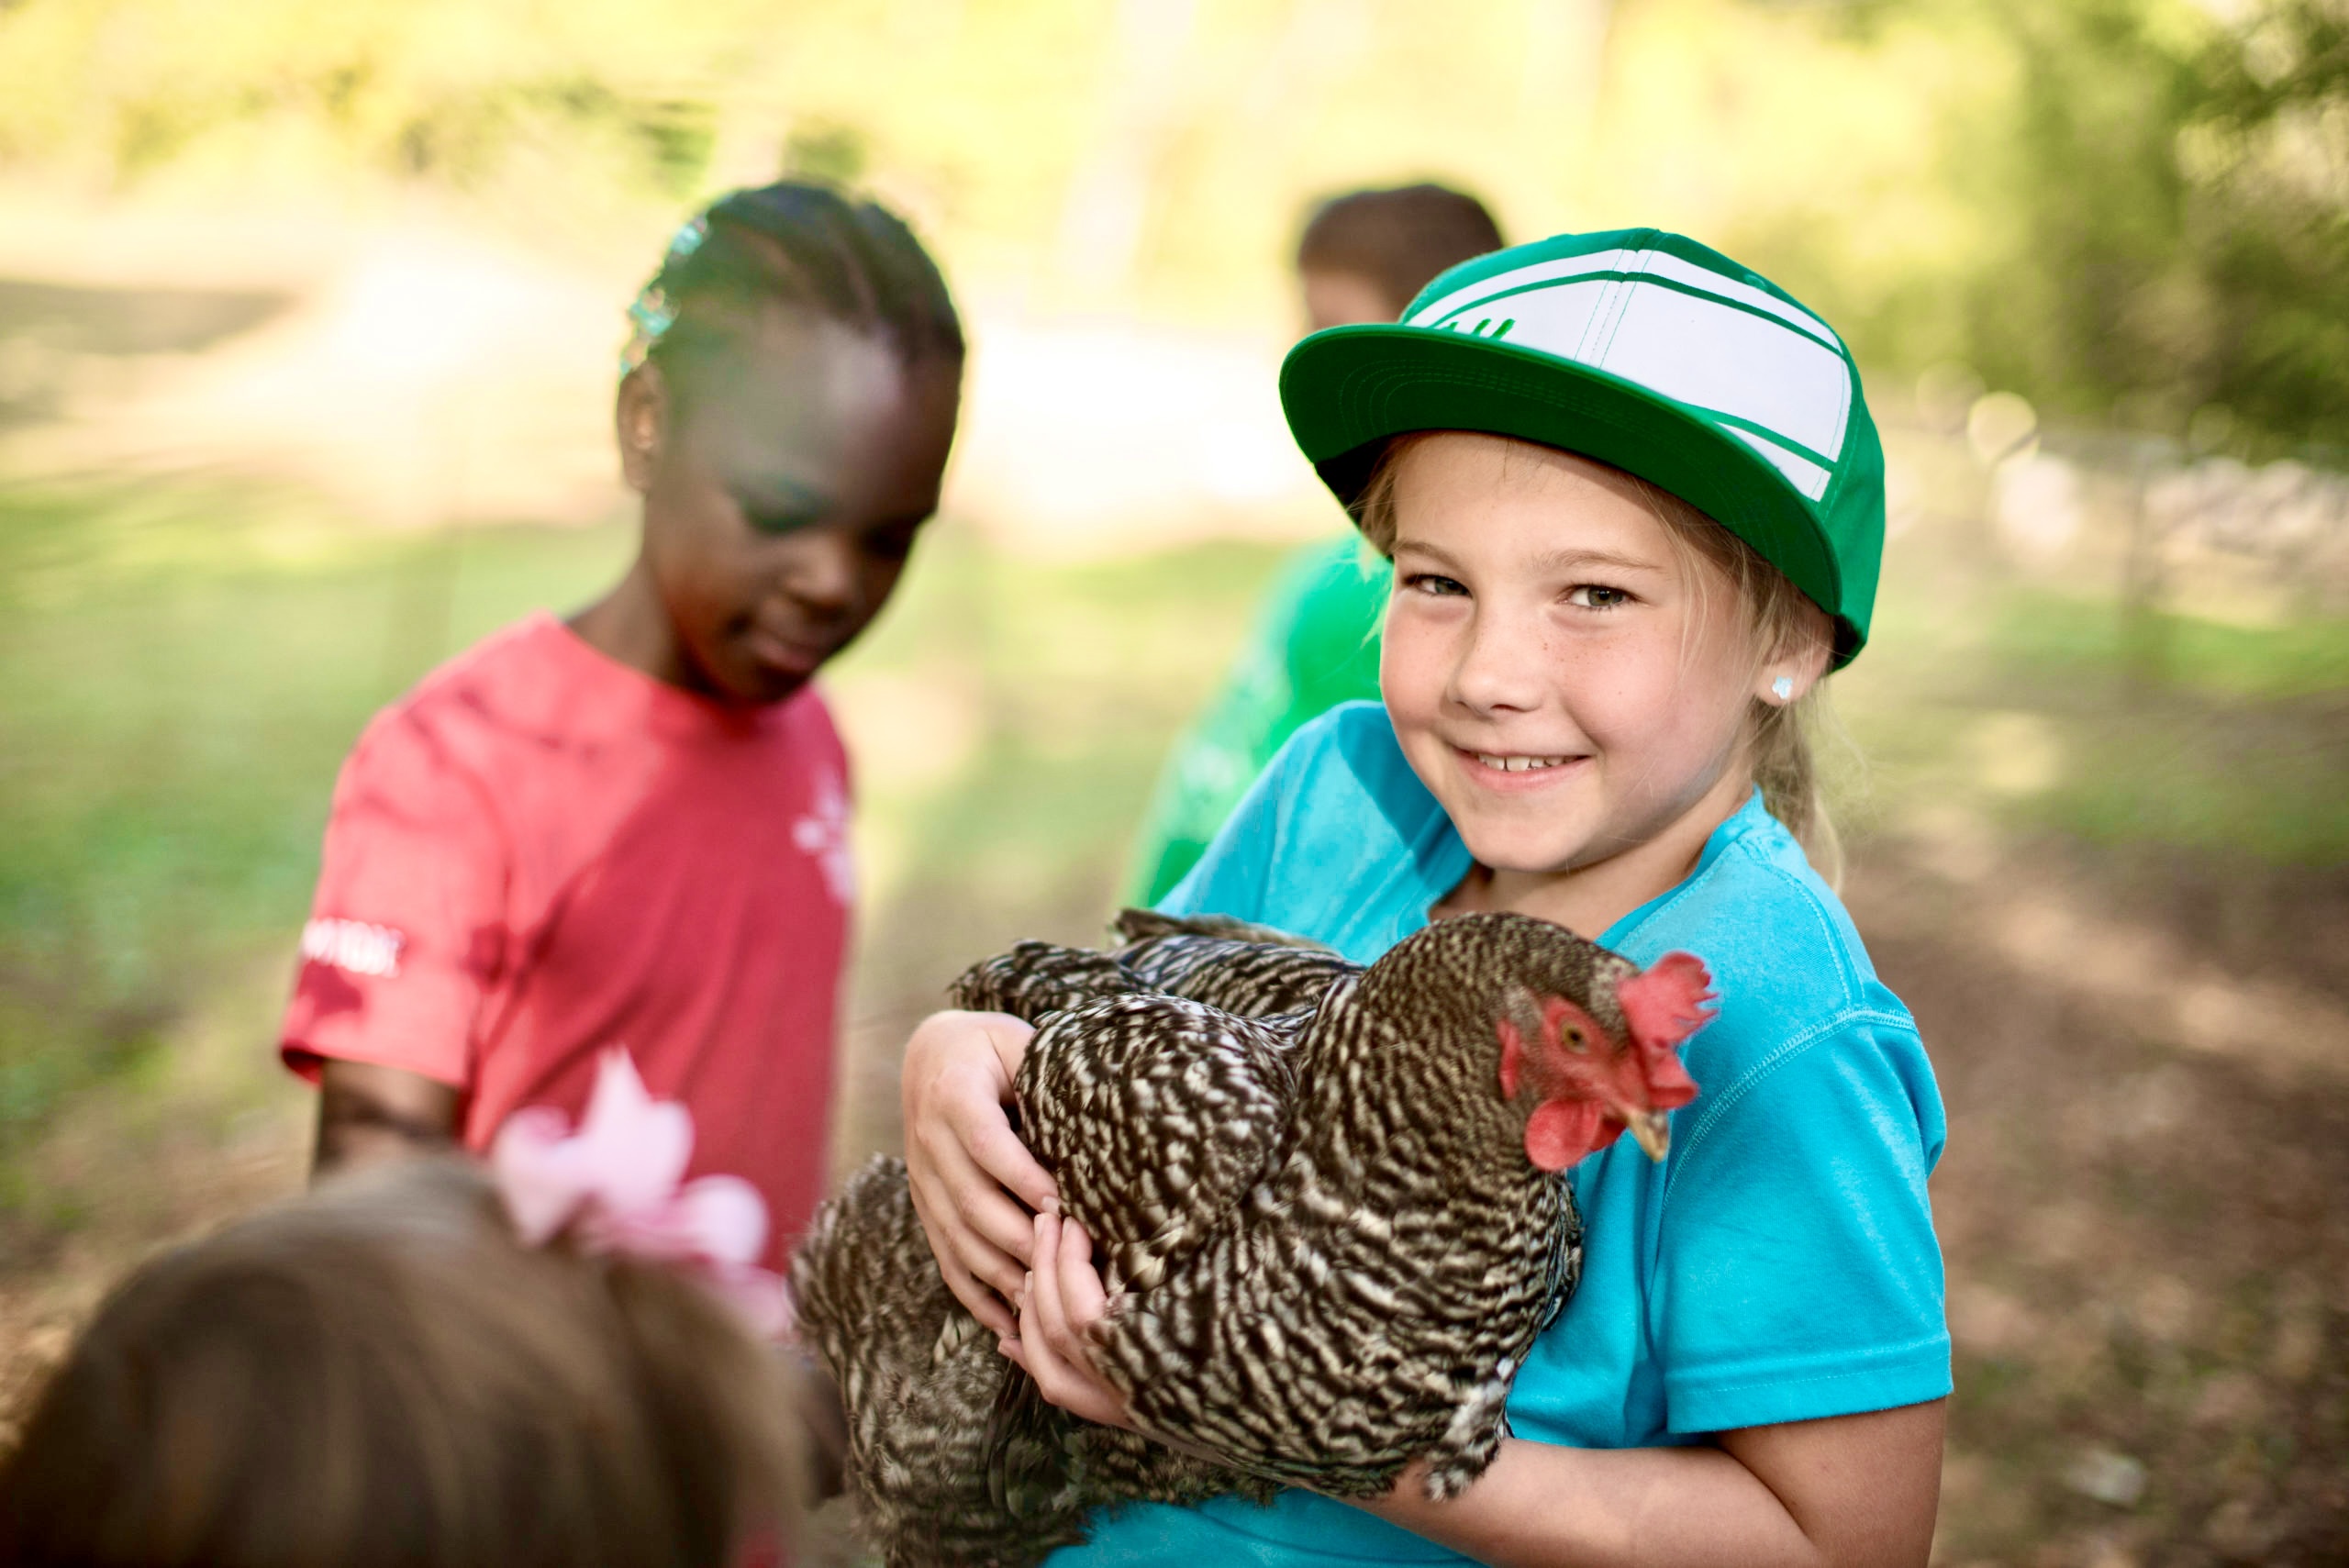 Home School Lessons with Backyard Chickens